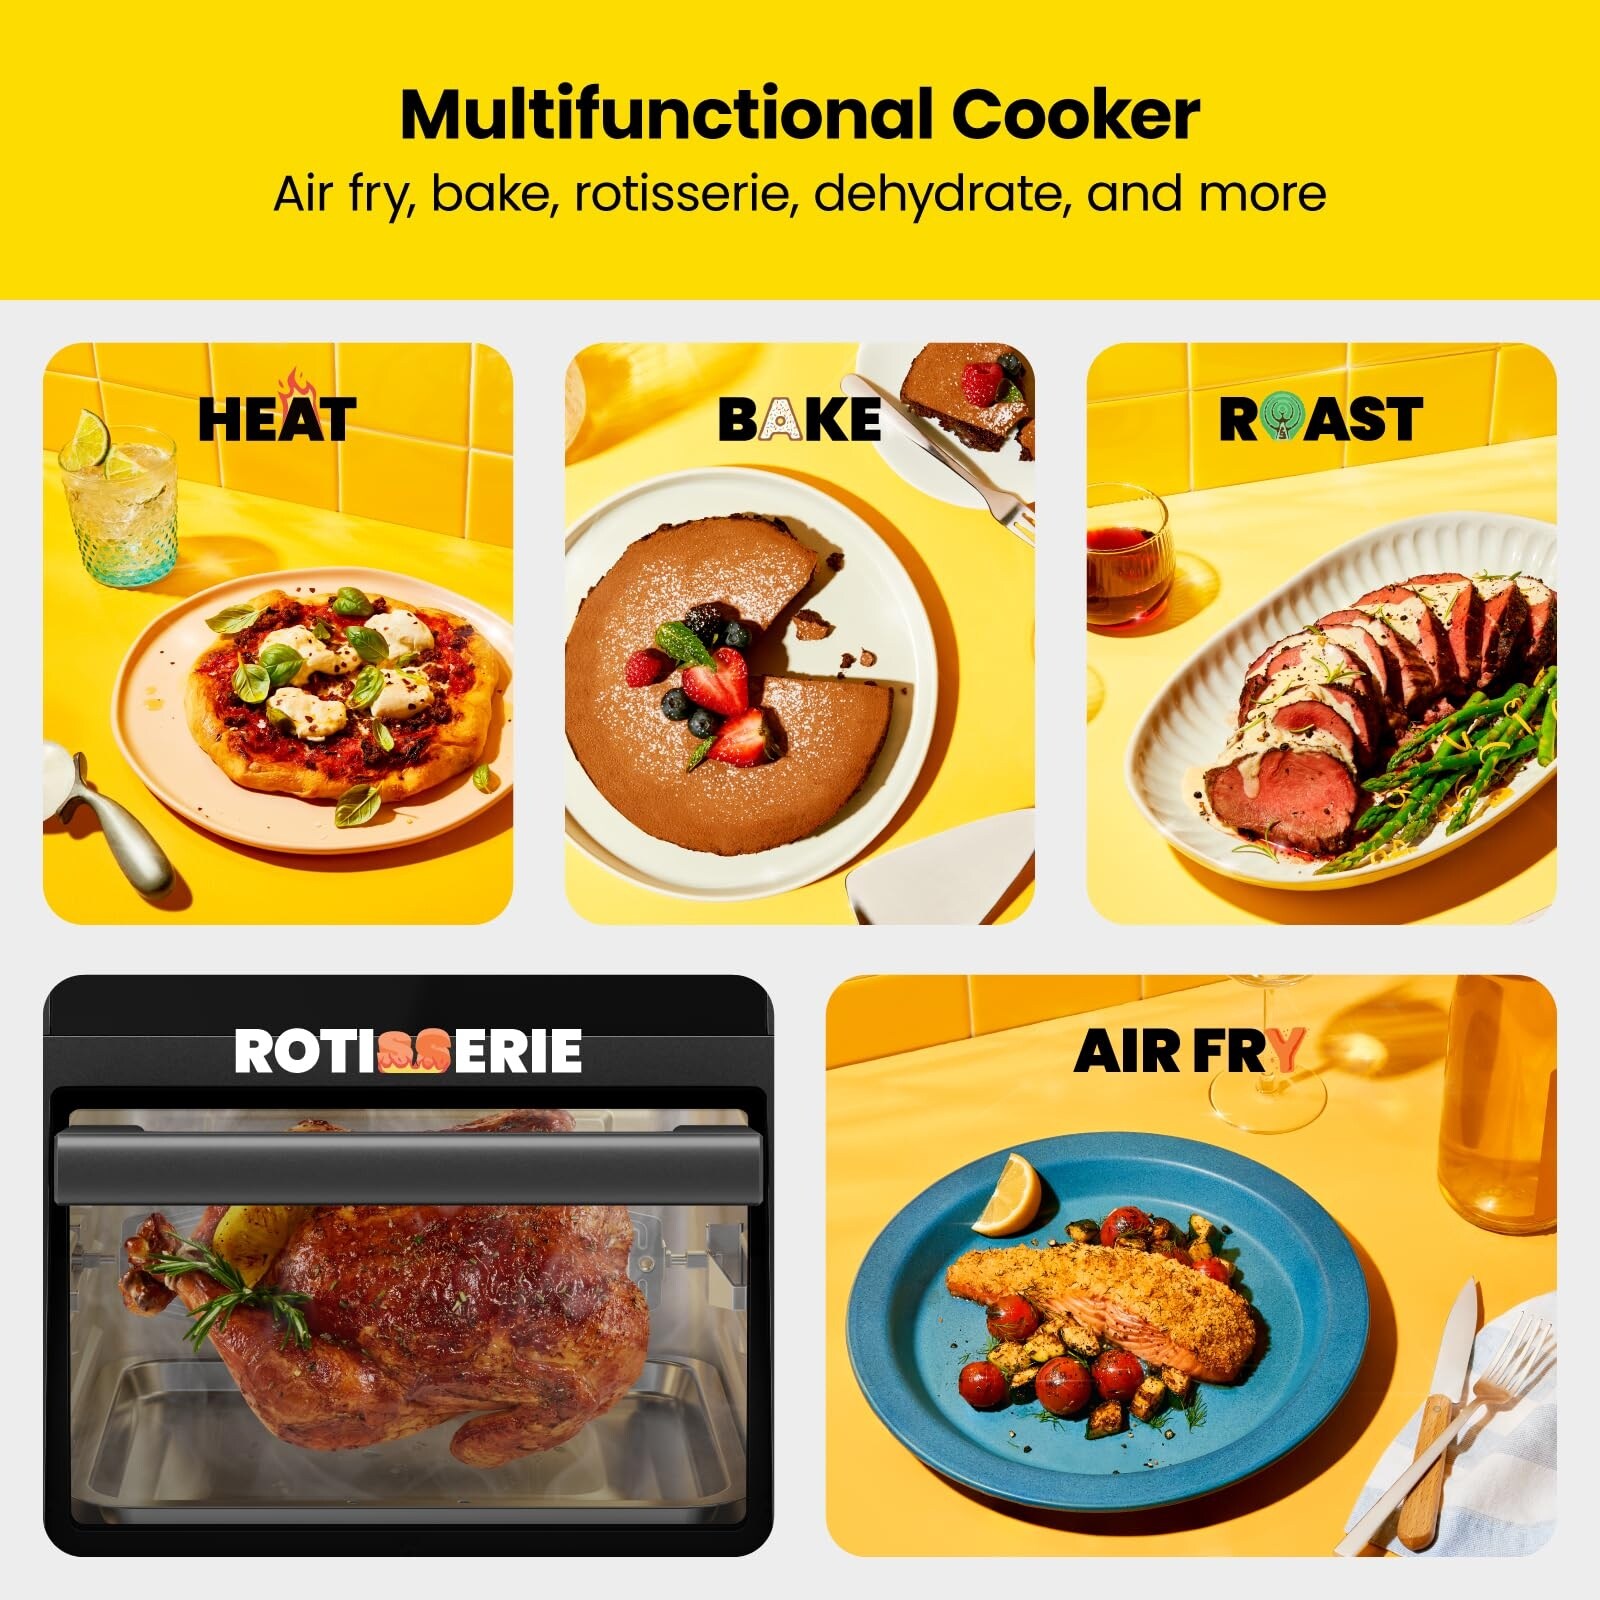 https://ak1.ostkcdn.com/images/products/is/images/direct/7b9bd16d52b33a2690d9dcc04e4402feac1db9ee/12-Quart-5-in-1-Air-Fryer-with-Integrated-Smart-Cooking-Thermometer%2C-28-Touchscreen-Presets%2C-Rotisserie%2C-Dehydrator%2C-Black.jpg